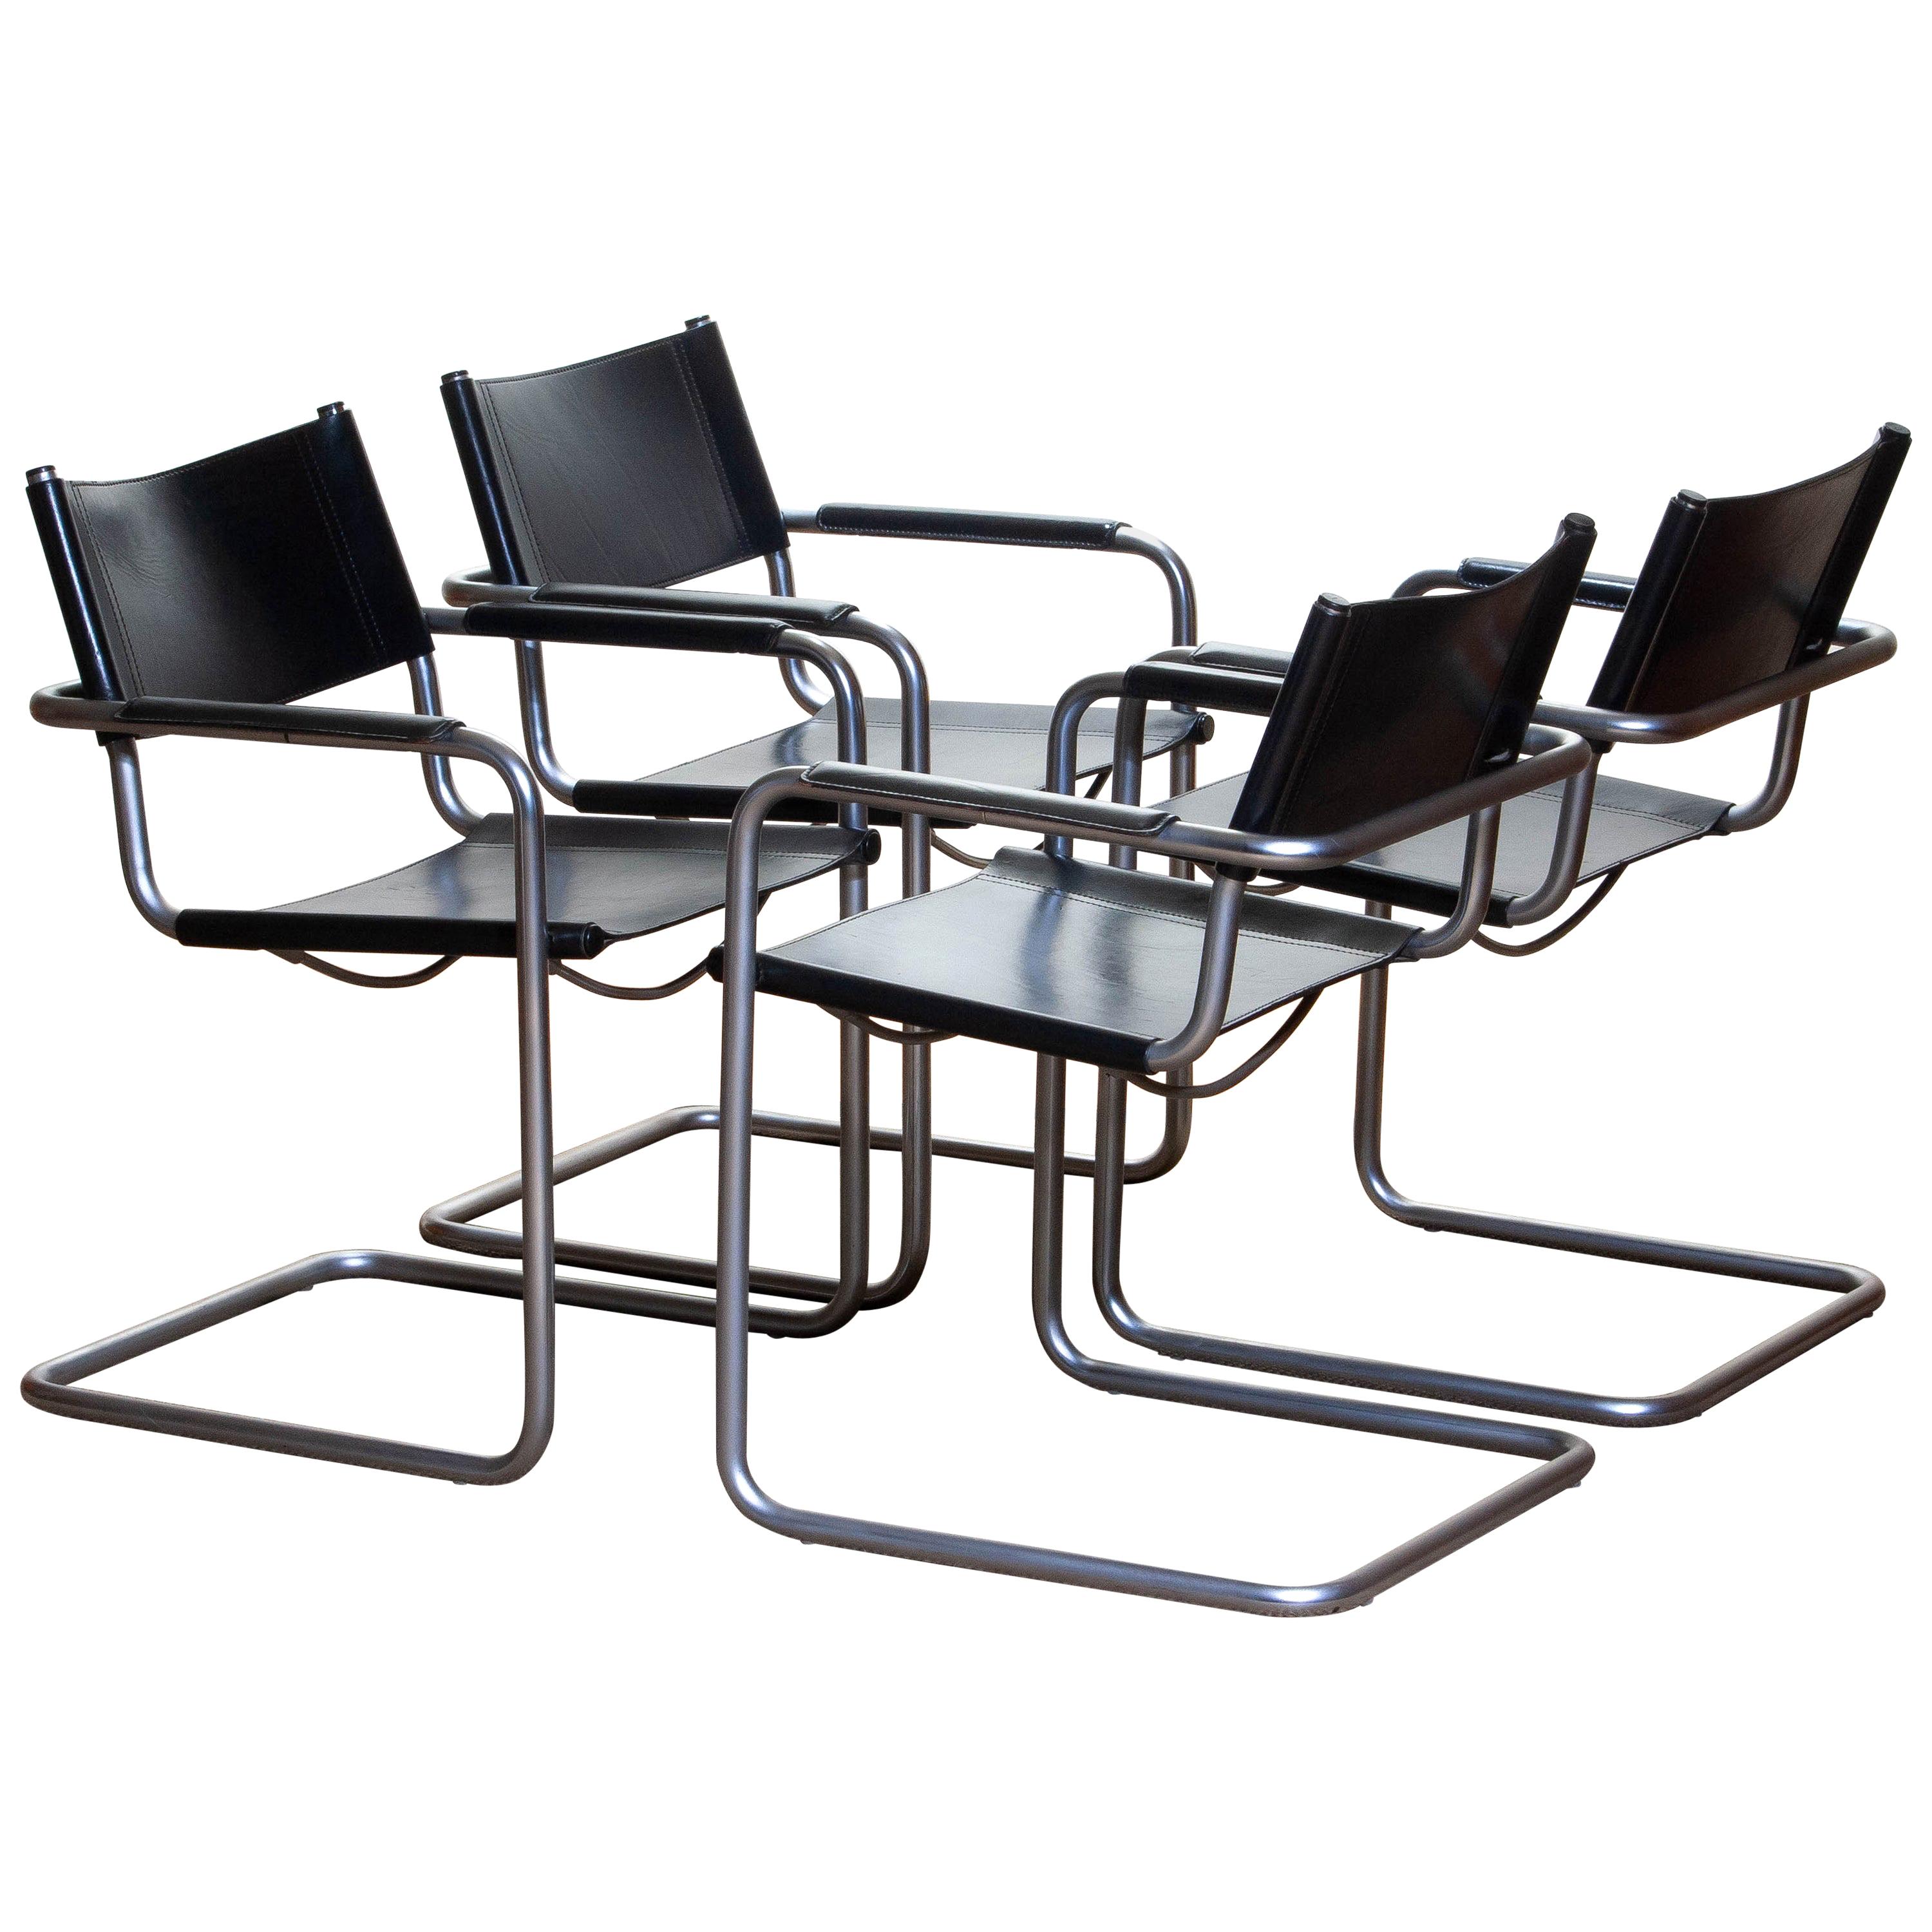 Mid-Century Modern 1970s, Set of Four MG5 Black Leather Dining / Office Chairs by Matteo Grassi